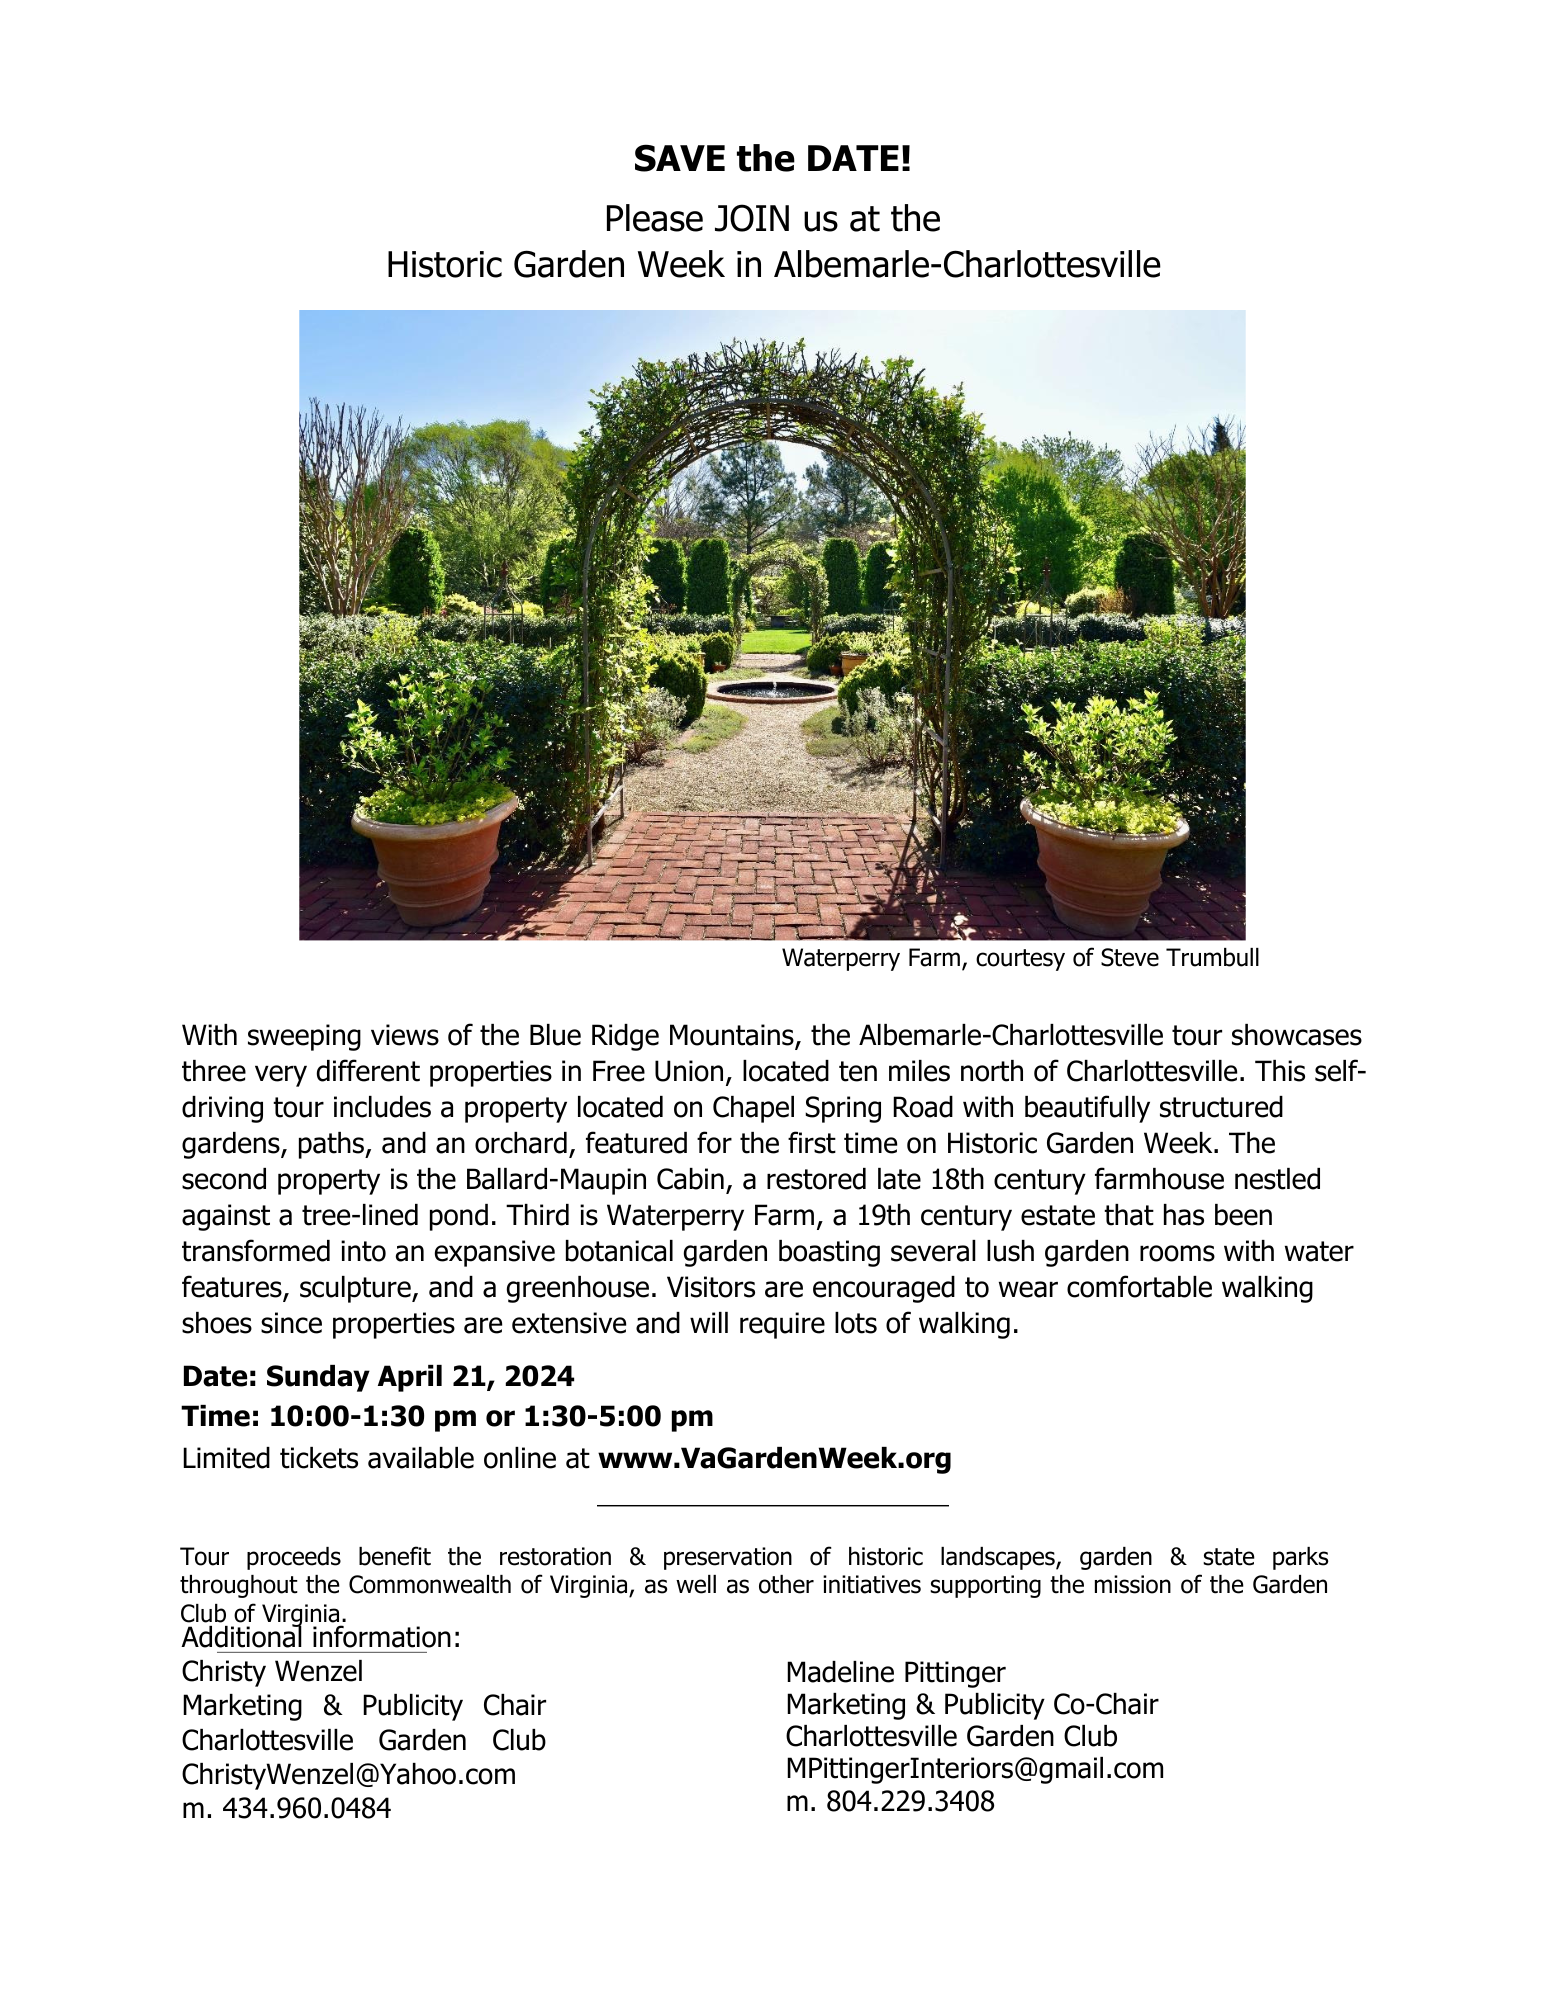 VA GARDEN WEEK- The Albemarle, Charlottesville and Rivanna Garden Clubs- Sunday April 21, 2024-10:00-1:30 pm or 1:30-5:00 pm